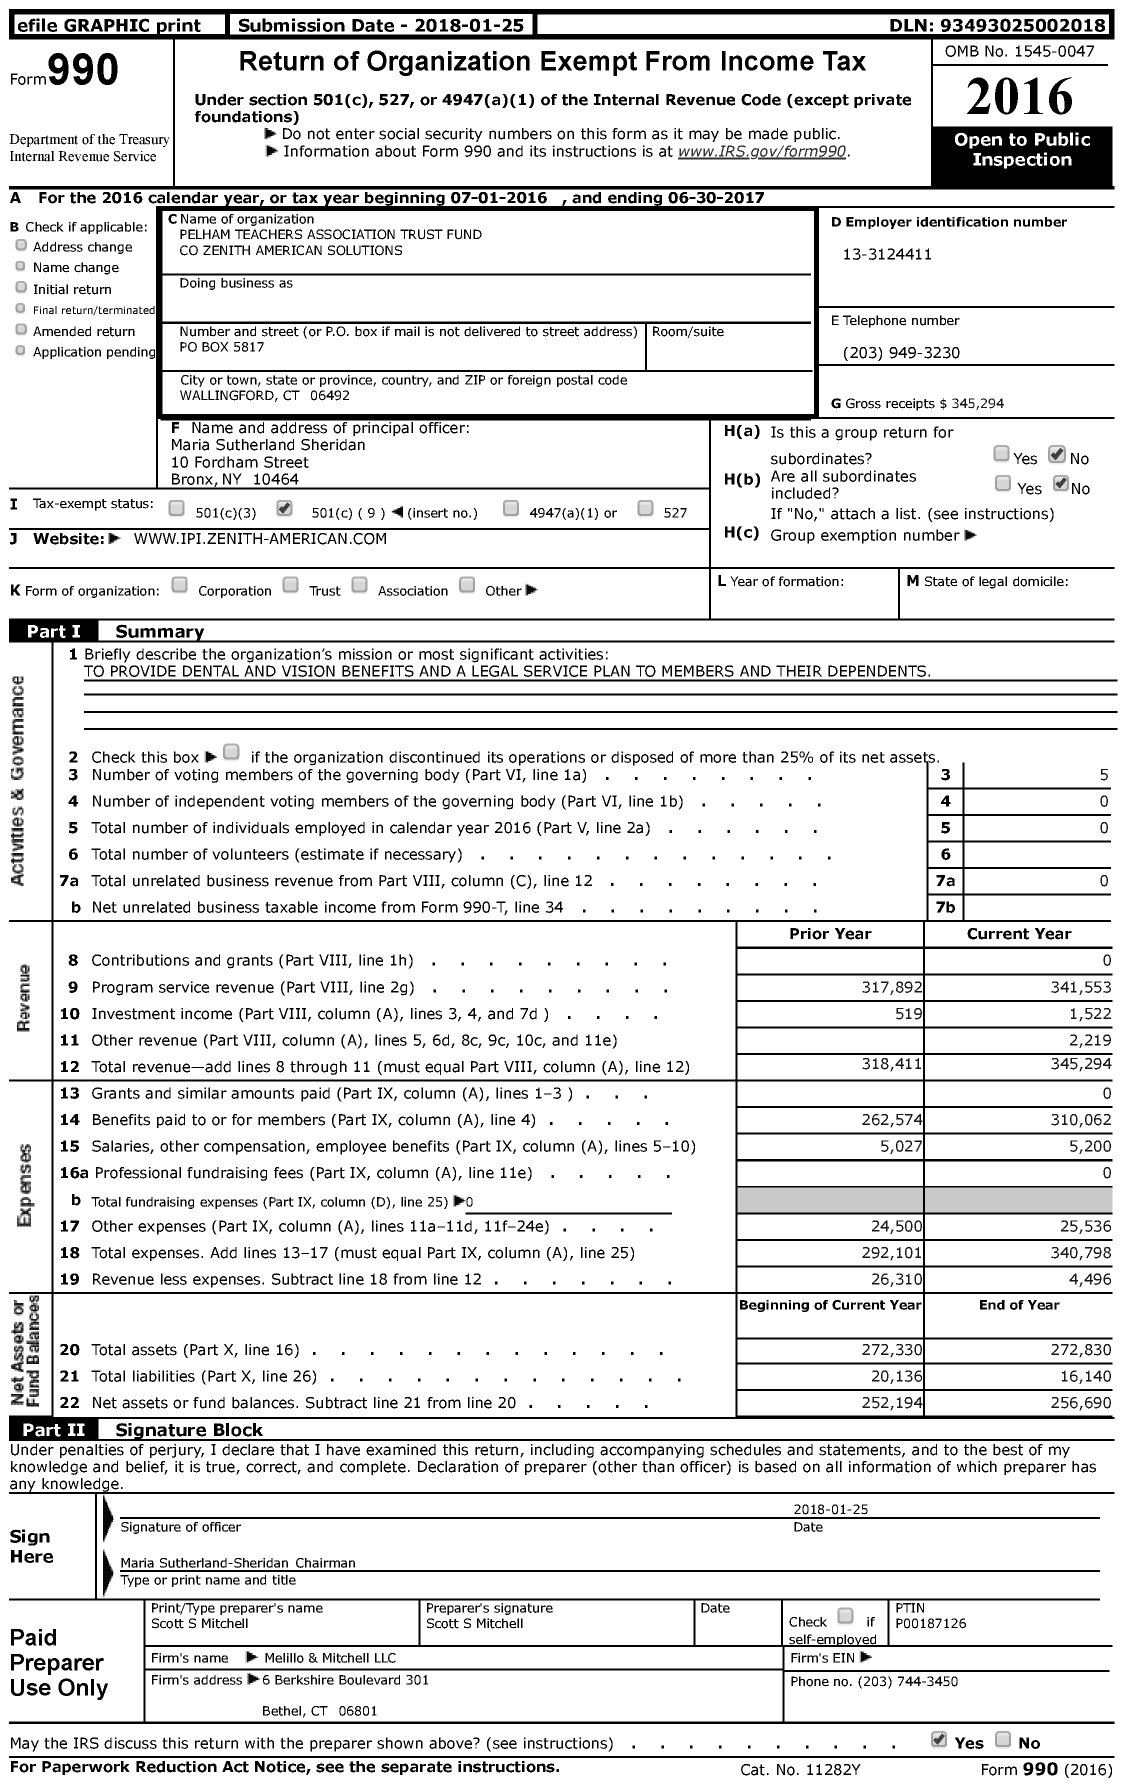 Image of first page of 2016 Form 990 for Pelham Teachers Association Trust Fund